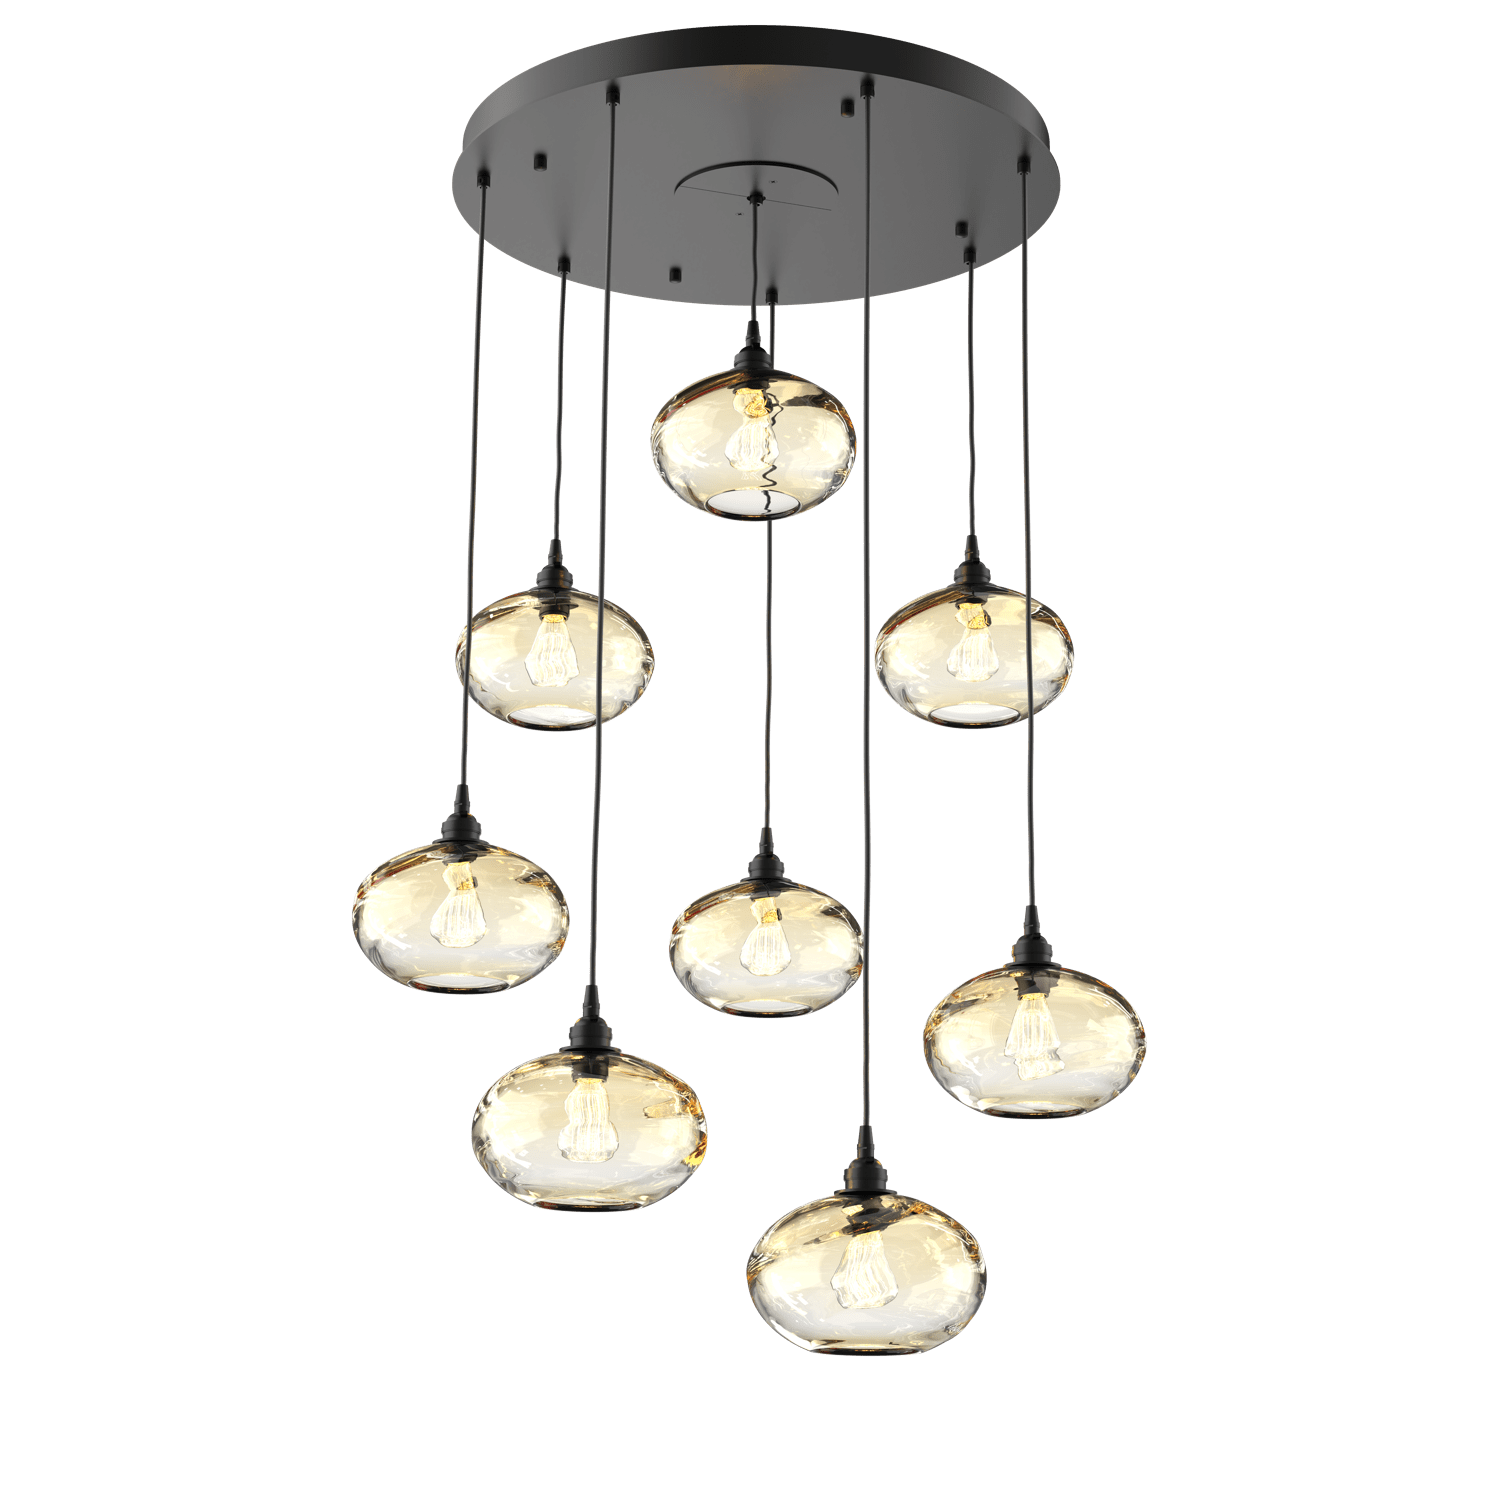 CHB0036-08-MB-OA-Hammerton-Studio-Optic-Blown-Glass-Coppa-8-light-round-pendant-chandelier-with-matte-black-finish-and-optic-amber-blown-glass-shades-and-incandescent-lamping